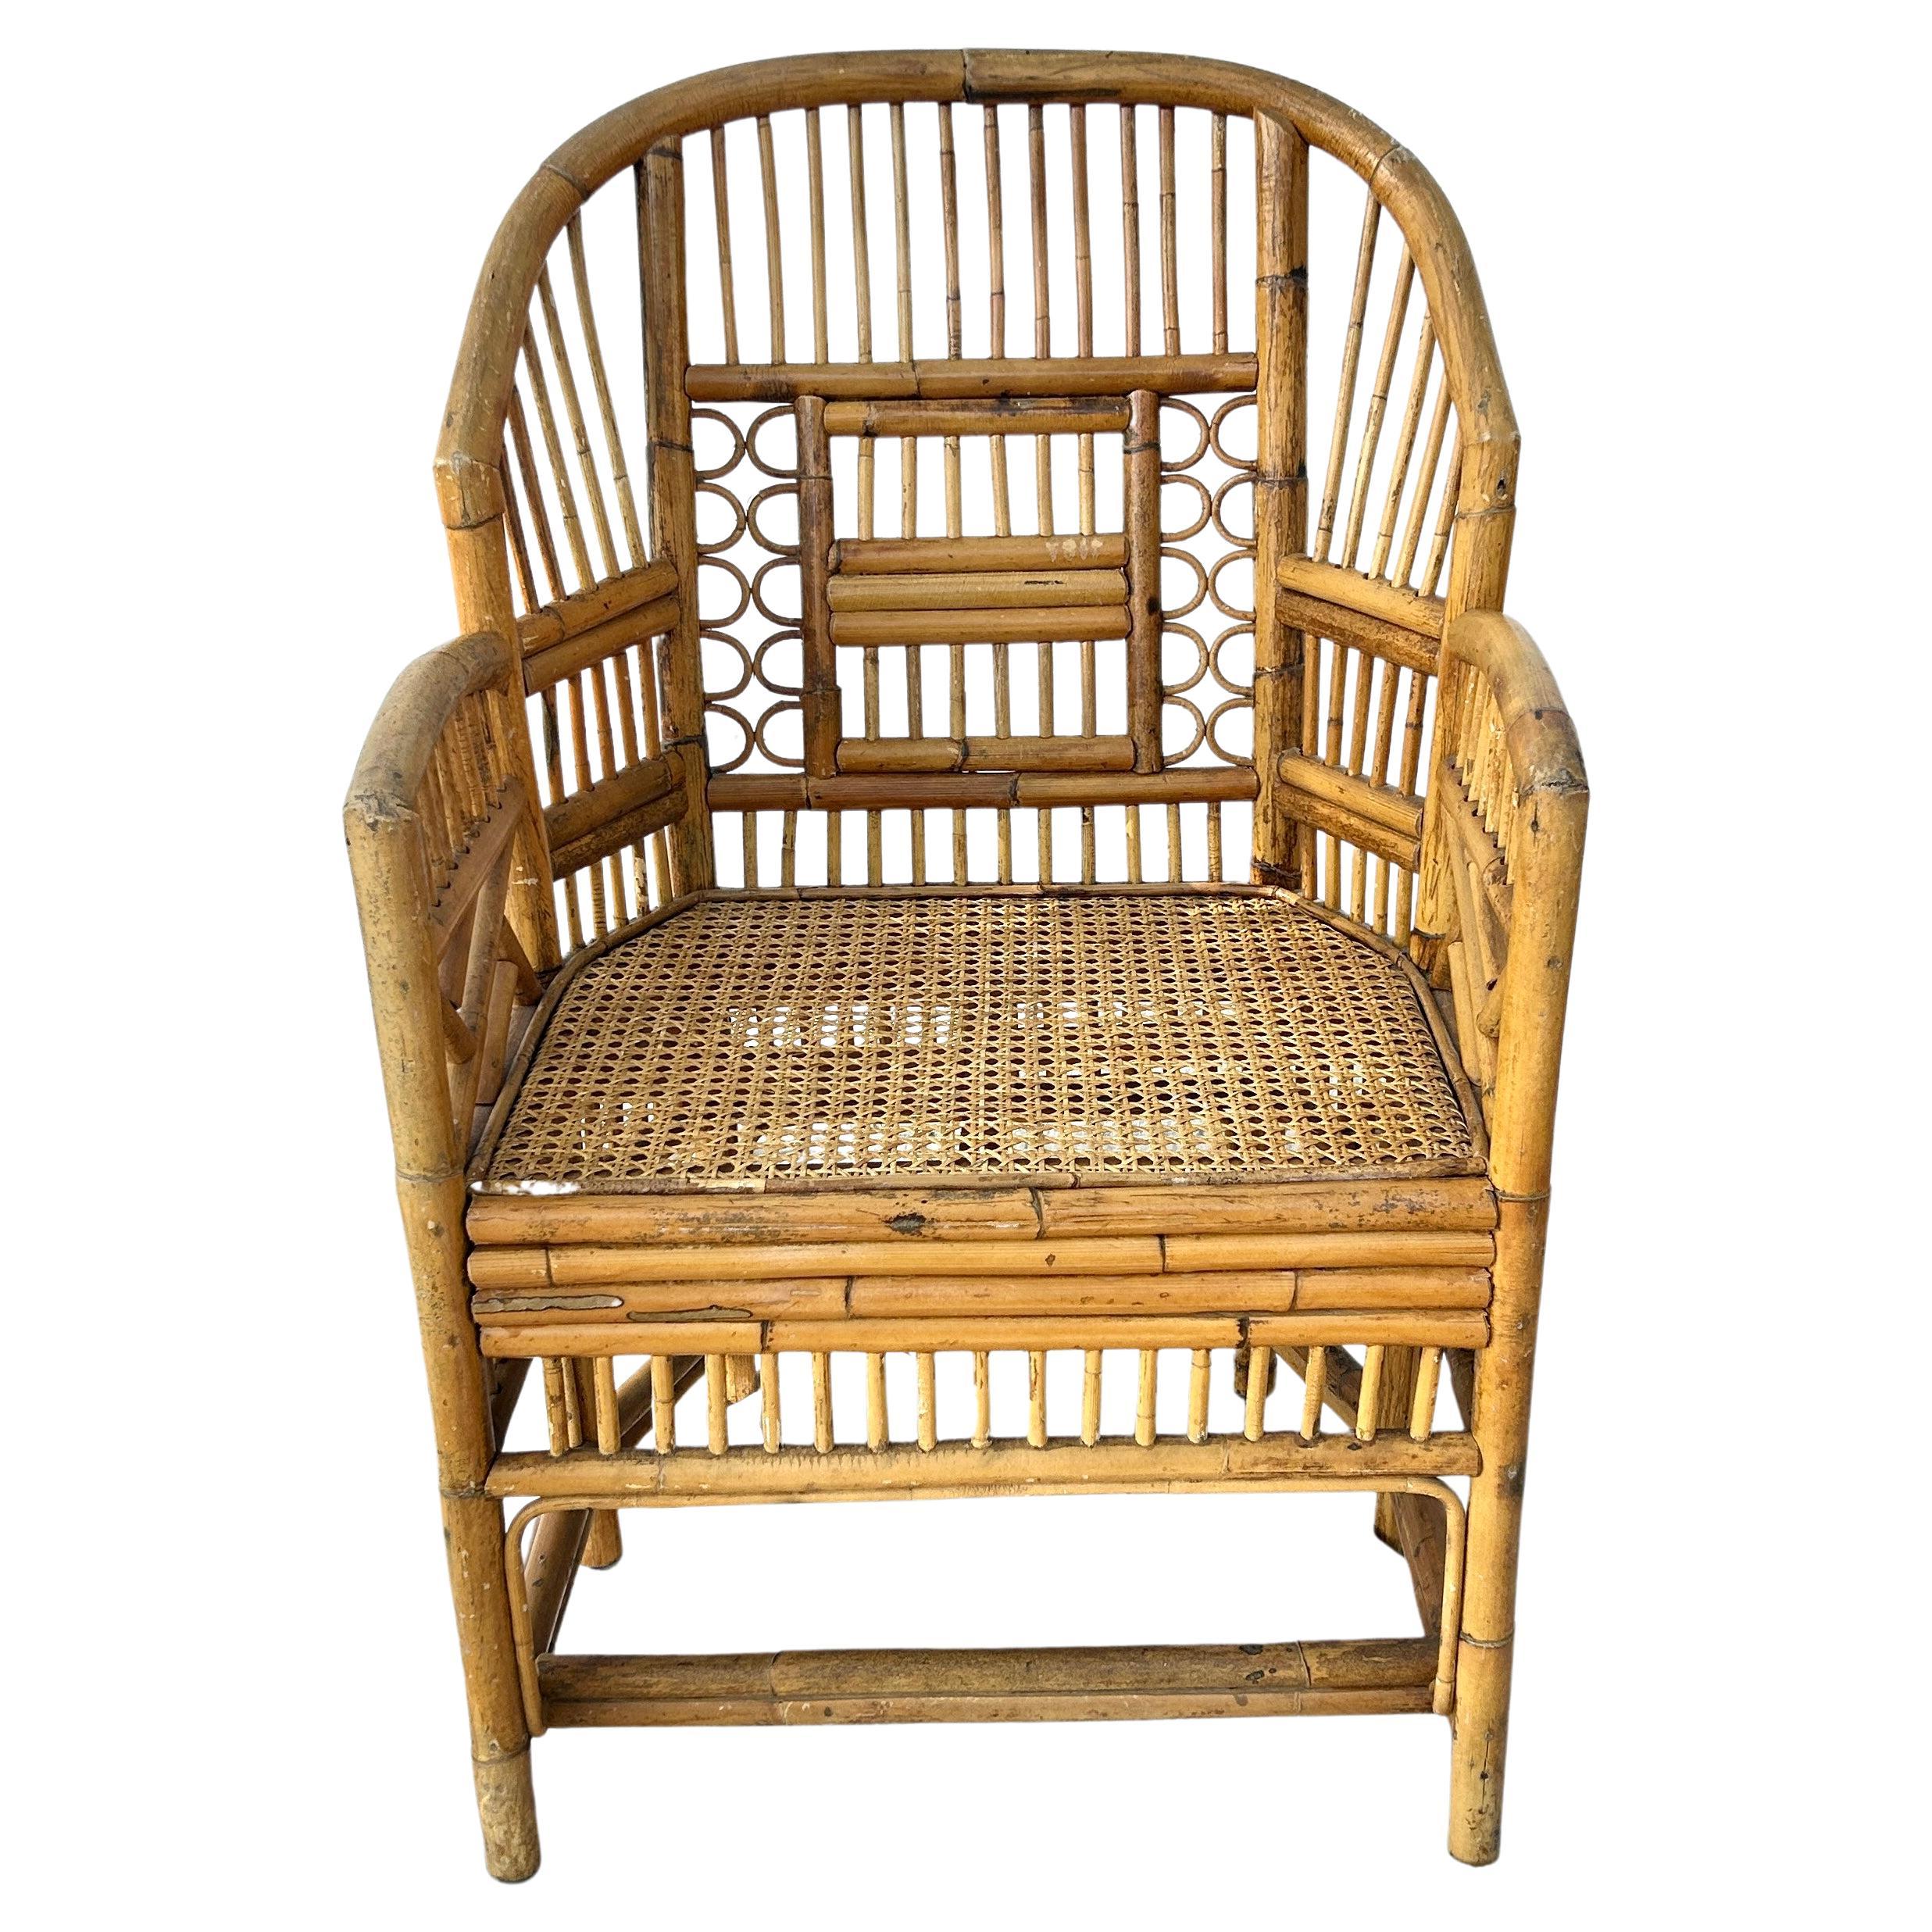 Vintage Brighton Pavilion Chinoiserie rattan burnt bamboo armchair on six legs. Handcrafted chair has woven cane seat and bamboo frame. Very sturdy with intact rattan and bamboo throughout. Perfect addition to decor in any indoor or outdoor room.